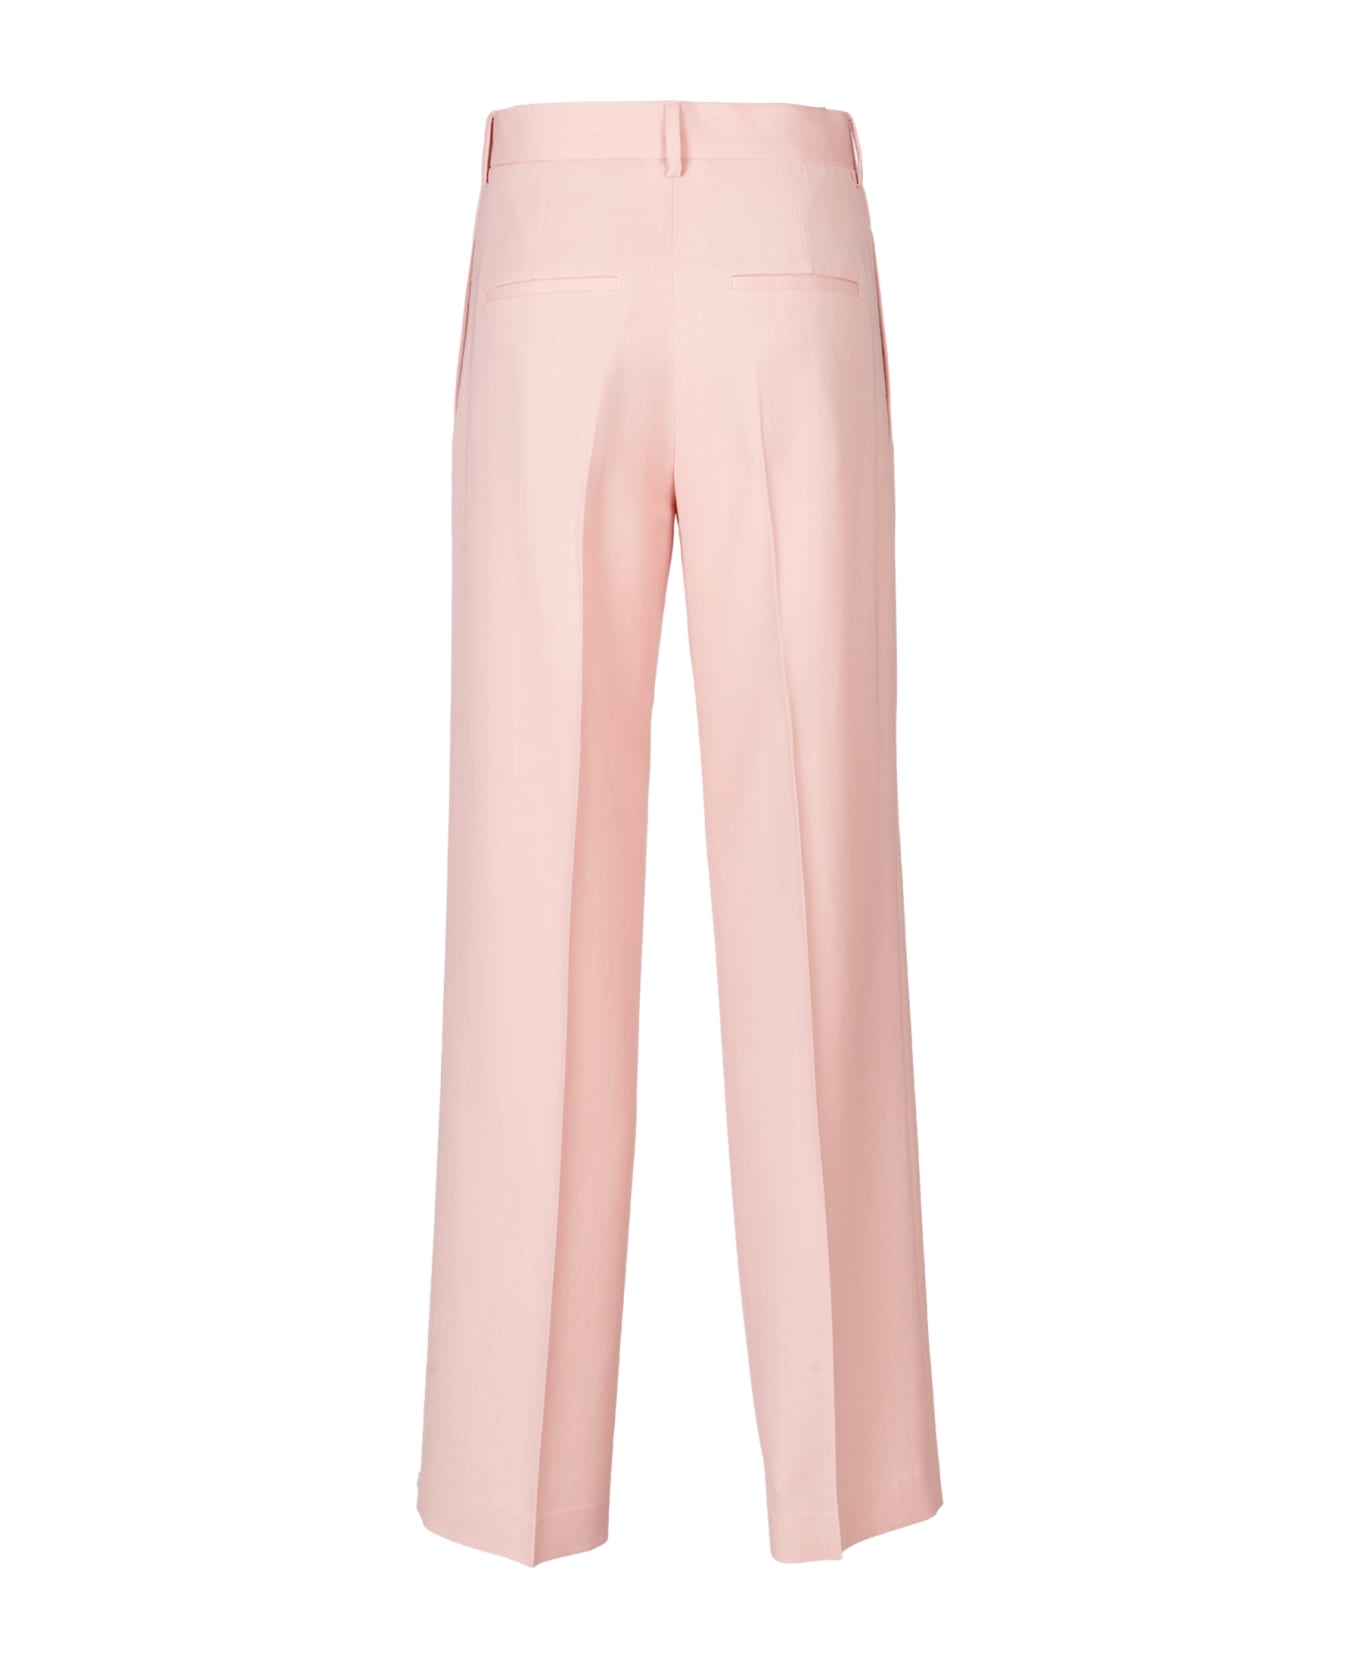 Paul Smith Trousers - Pink ボトムス